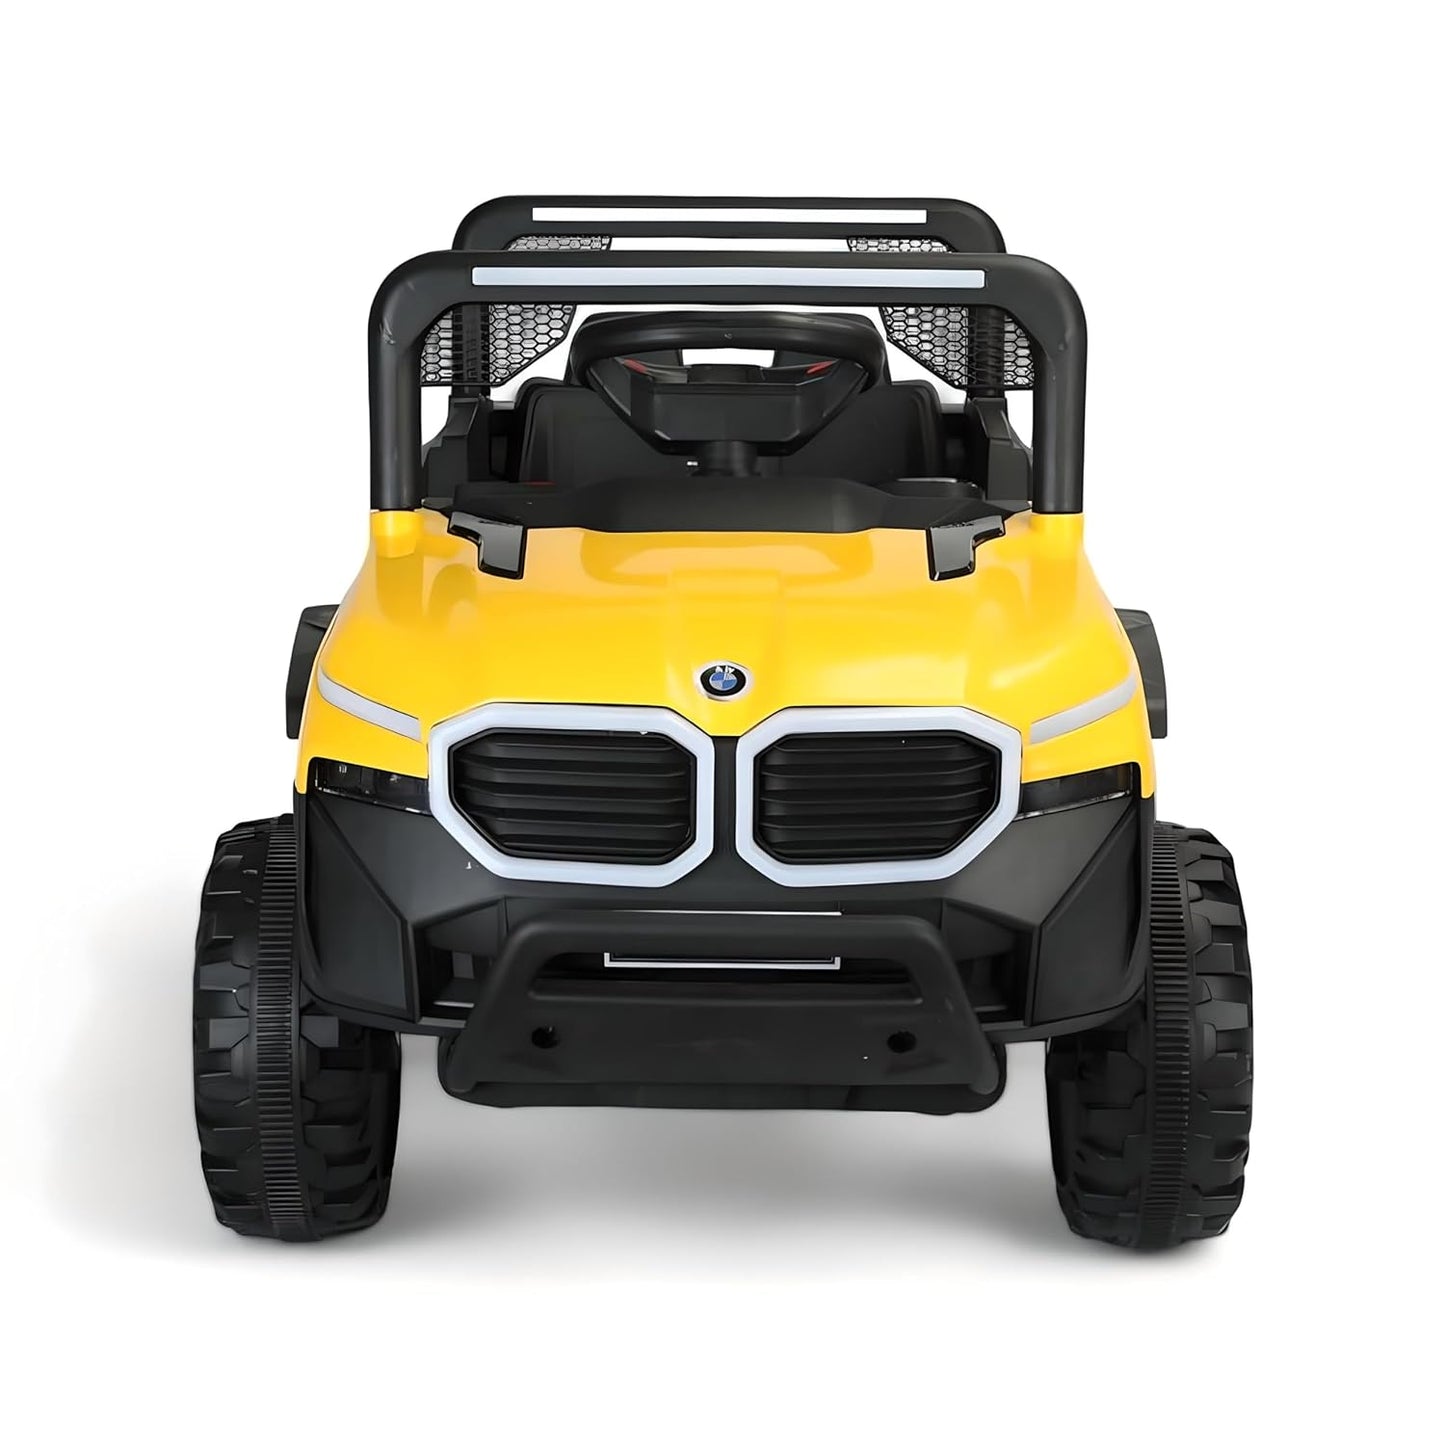 AYAAN TOYS Battery-Operated Ride-on Jeep for Kids, Featuring Dual Control Mode, Swing Function Equipped with Seat Belts & Suspension Springs, Suitable for Children Aged 2 to 5 Years - Yellow